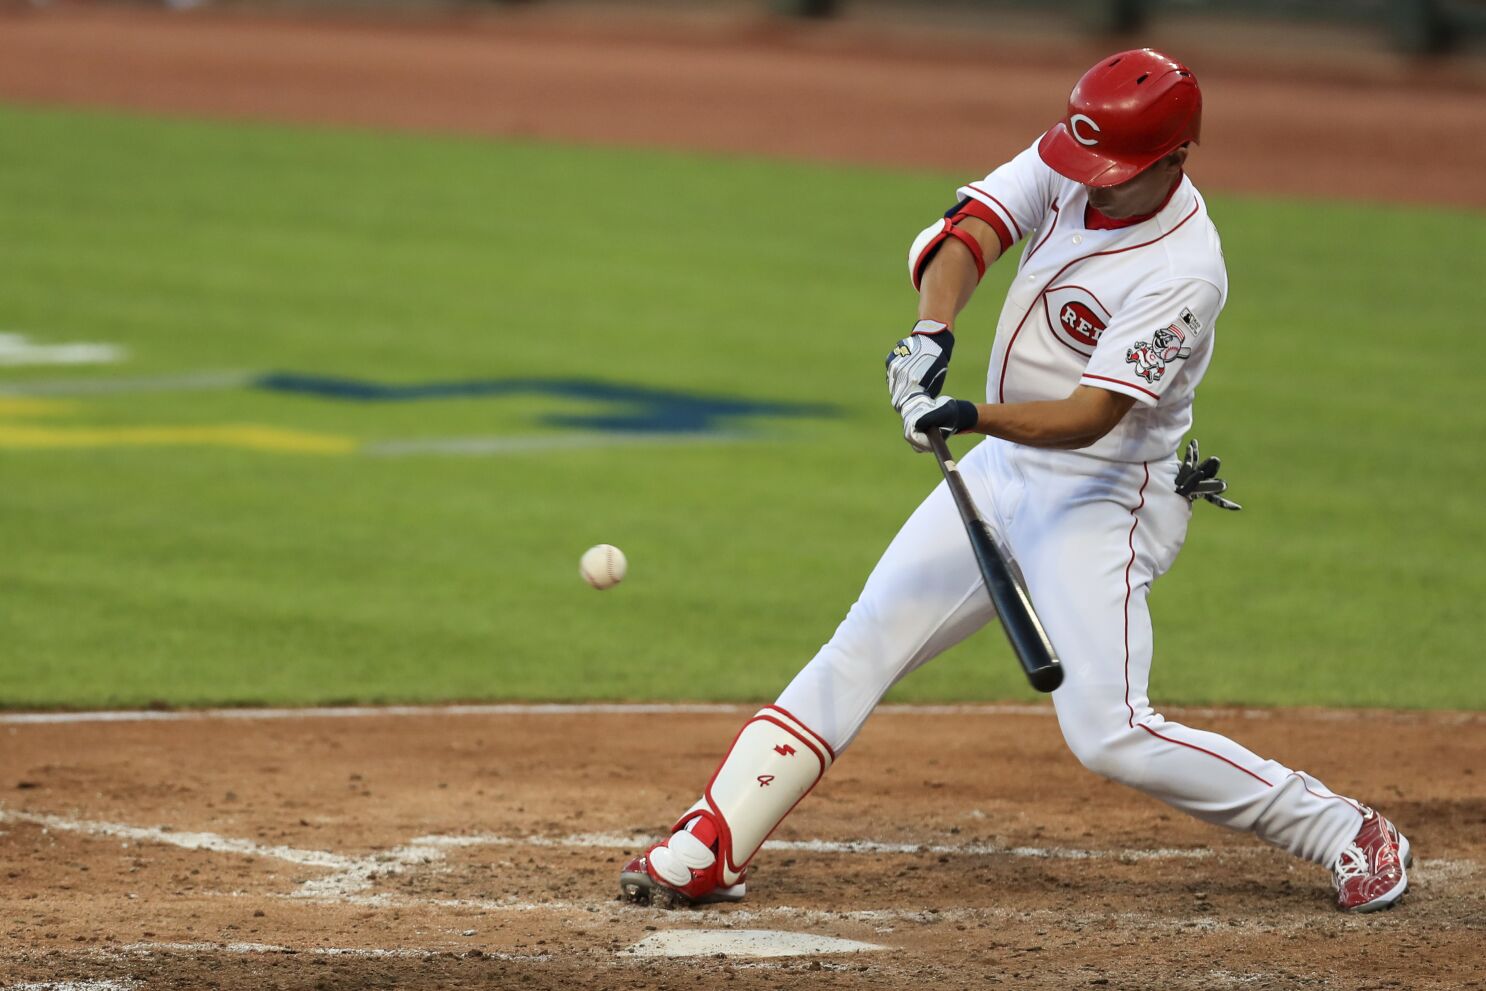 Opening impression: Moustakas leads Reds over Tigers 7-1